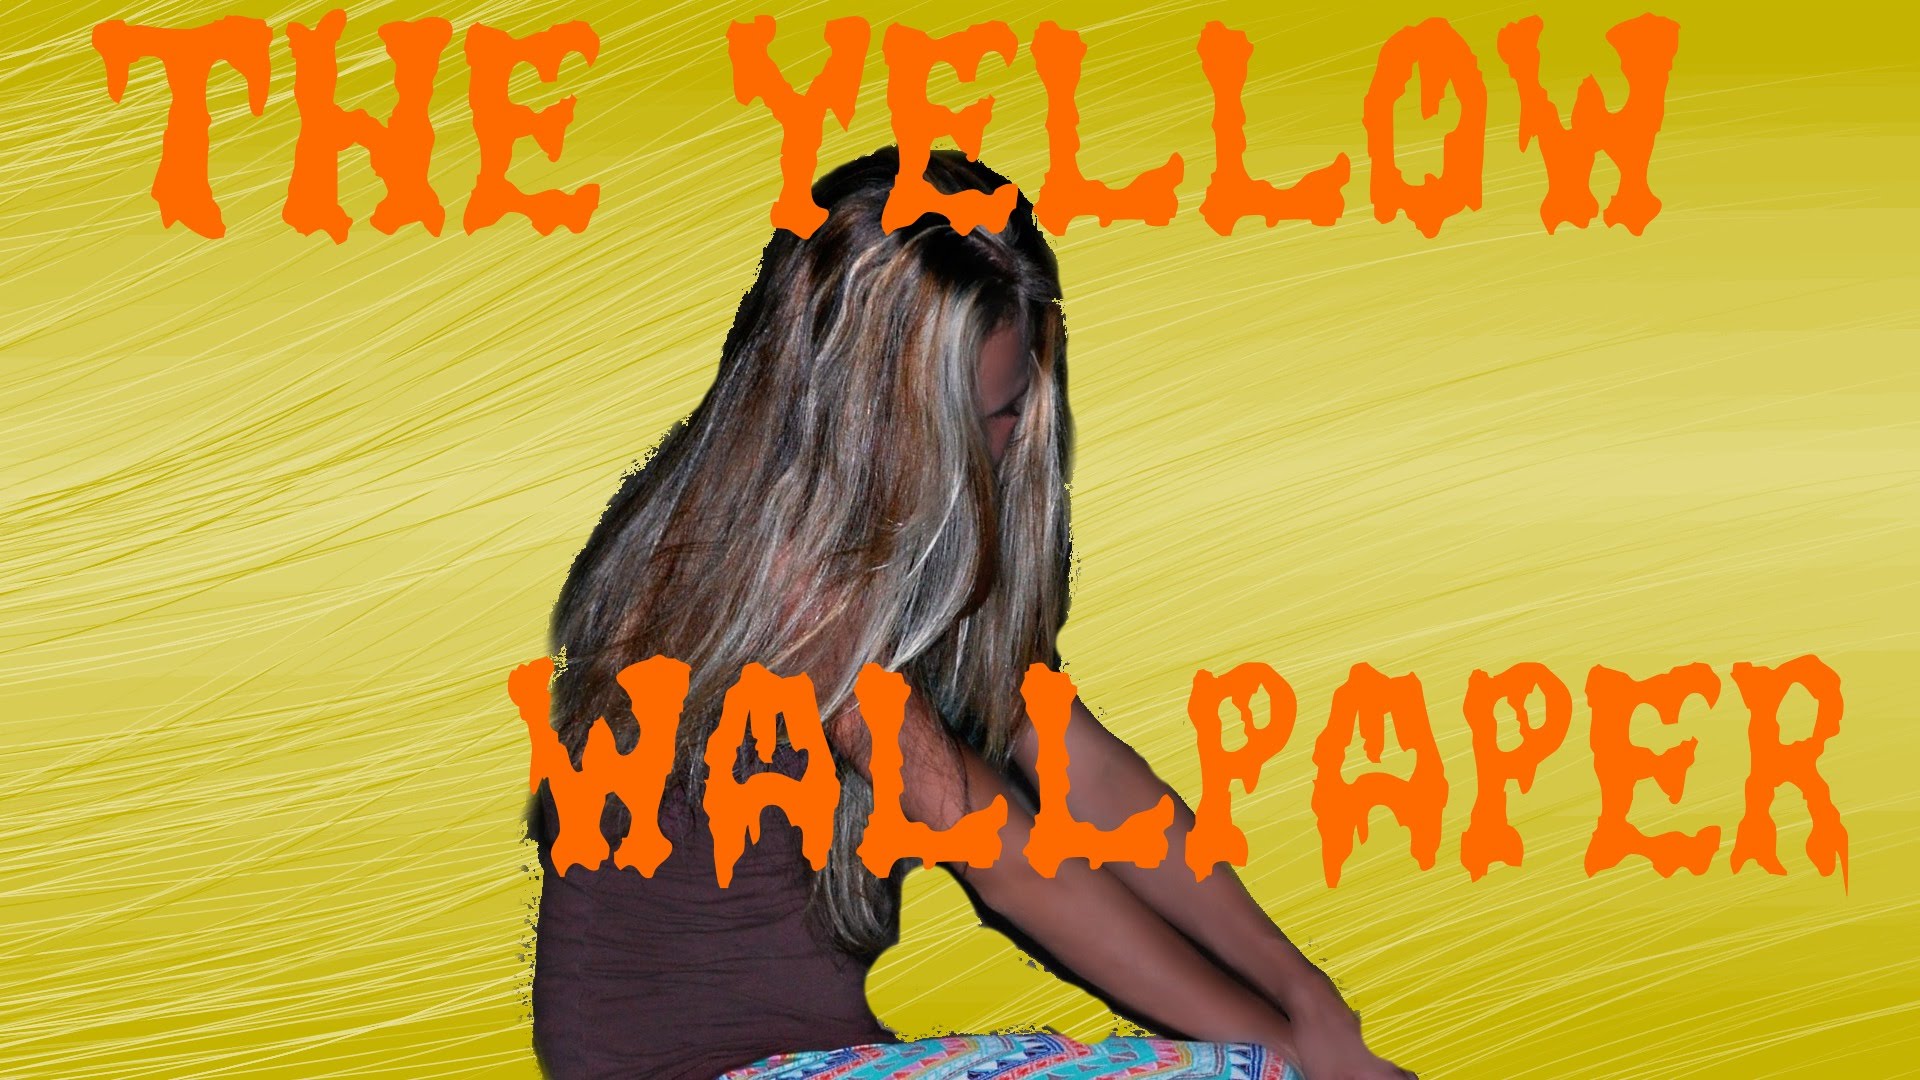 Characters in The Yellow Wallpaper the Narrator John Jennie  Mary   Literature Guides at IvyPanda